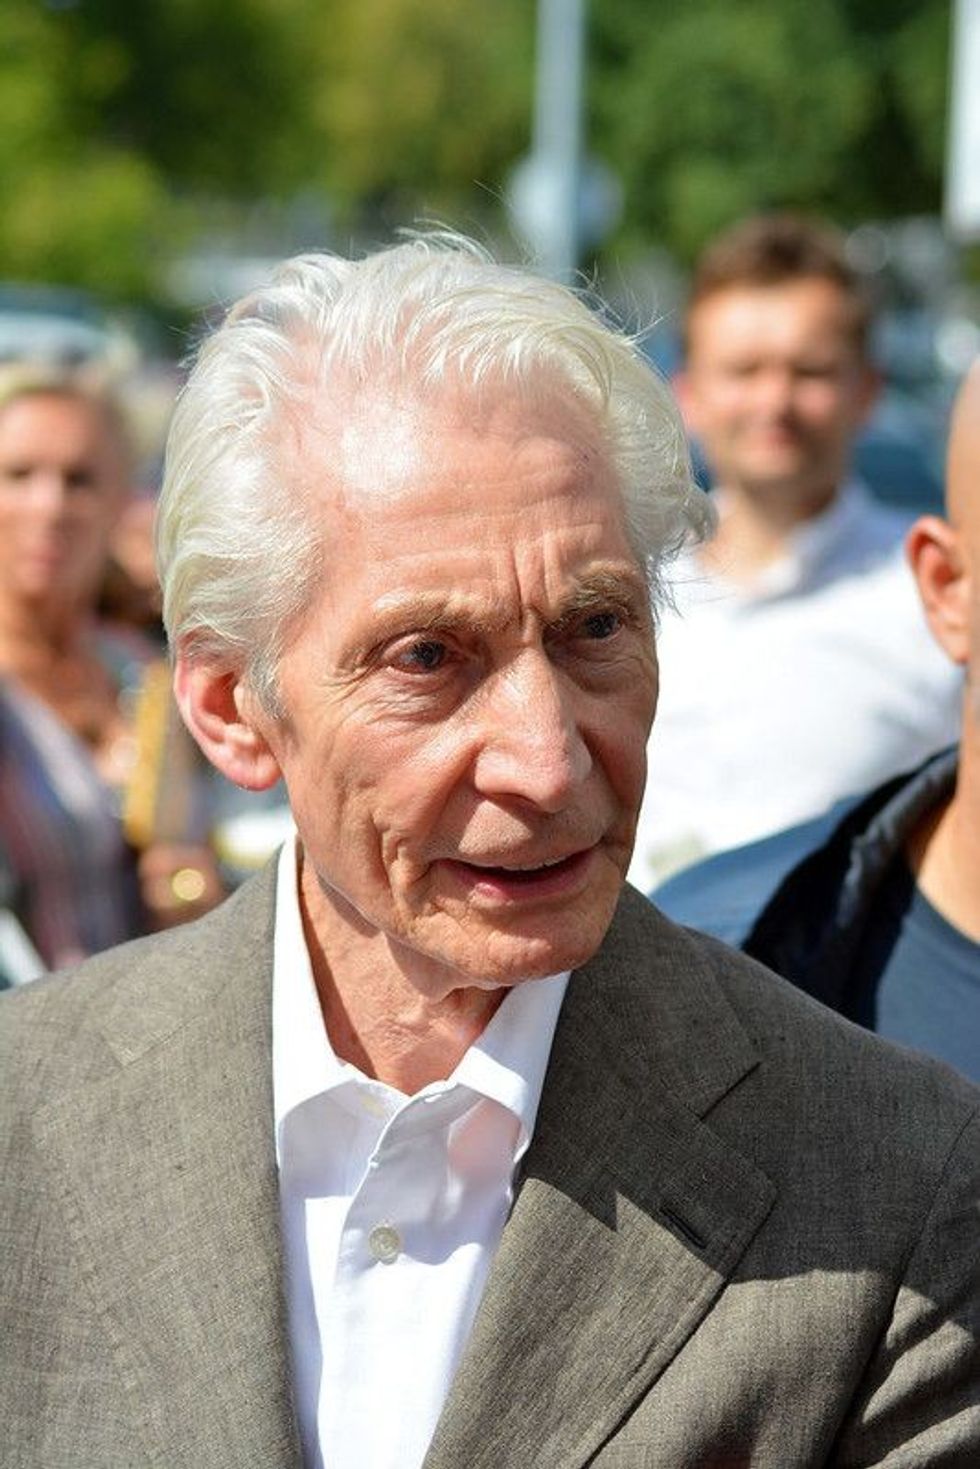 Charlie Watts is believed to be one of the greatest drummers of all time, being the spine of the Rolling Stones for decades.